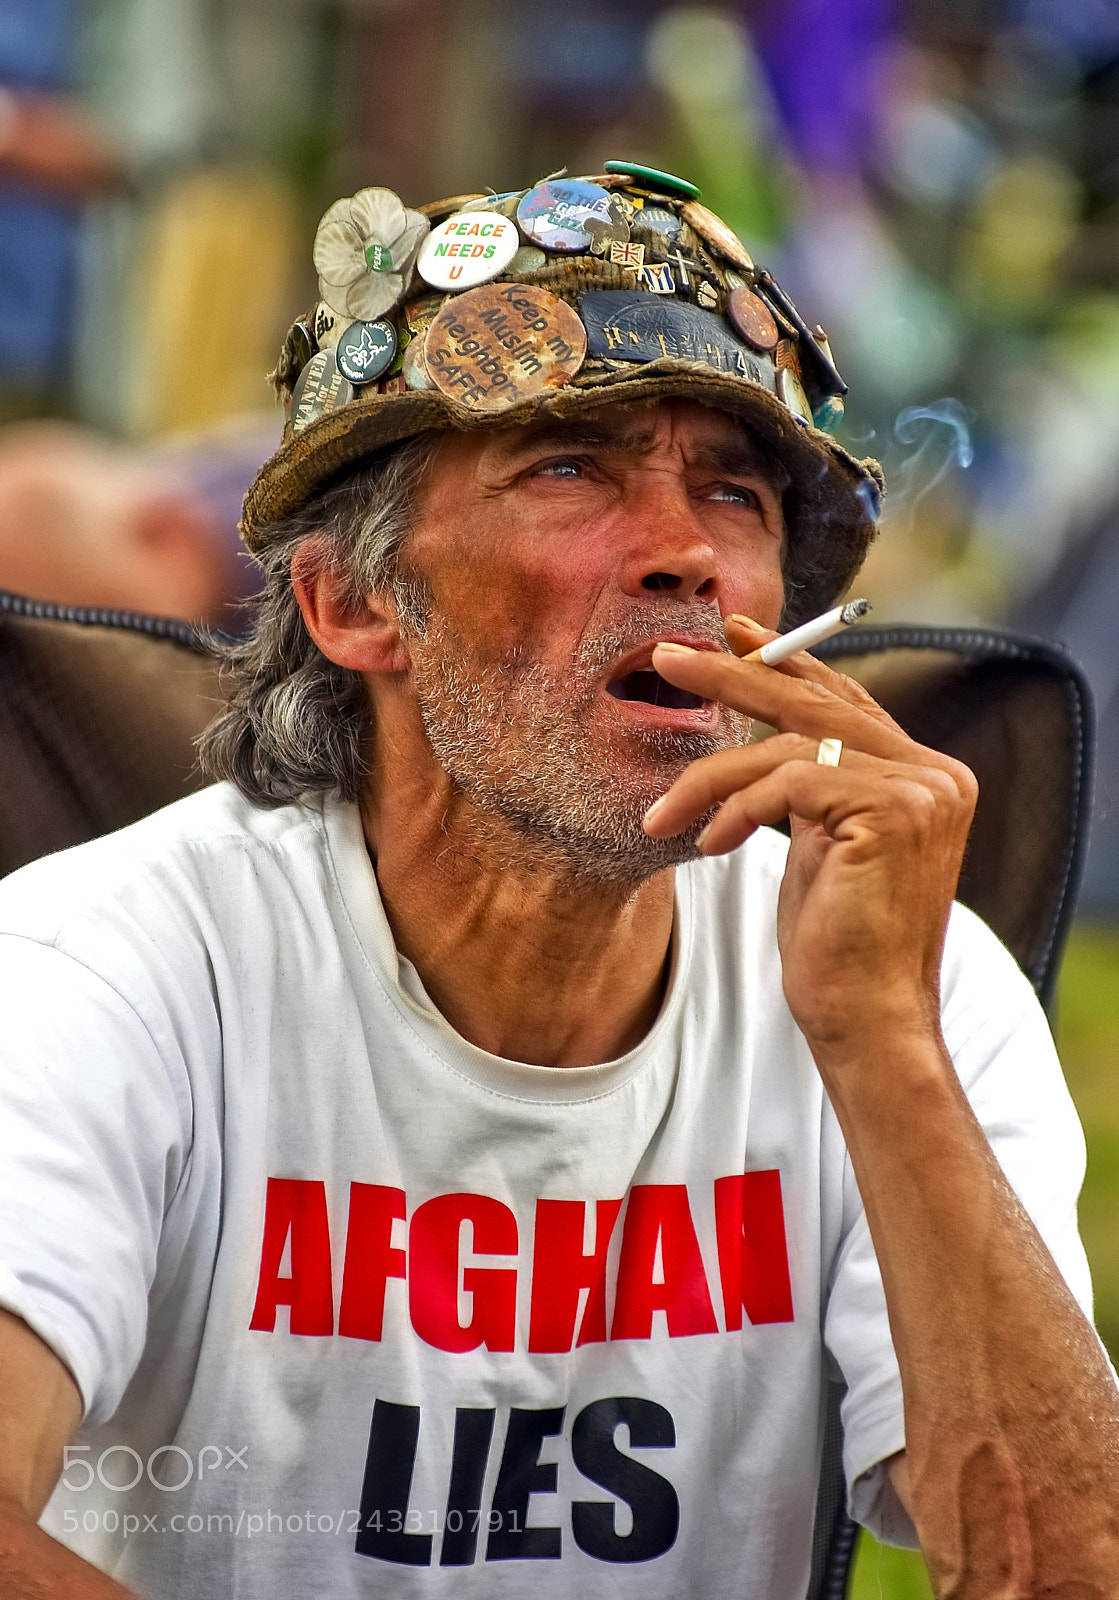 Pentax K10D sample photo. Anti-war protester brian haw. photography